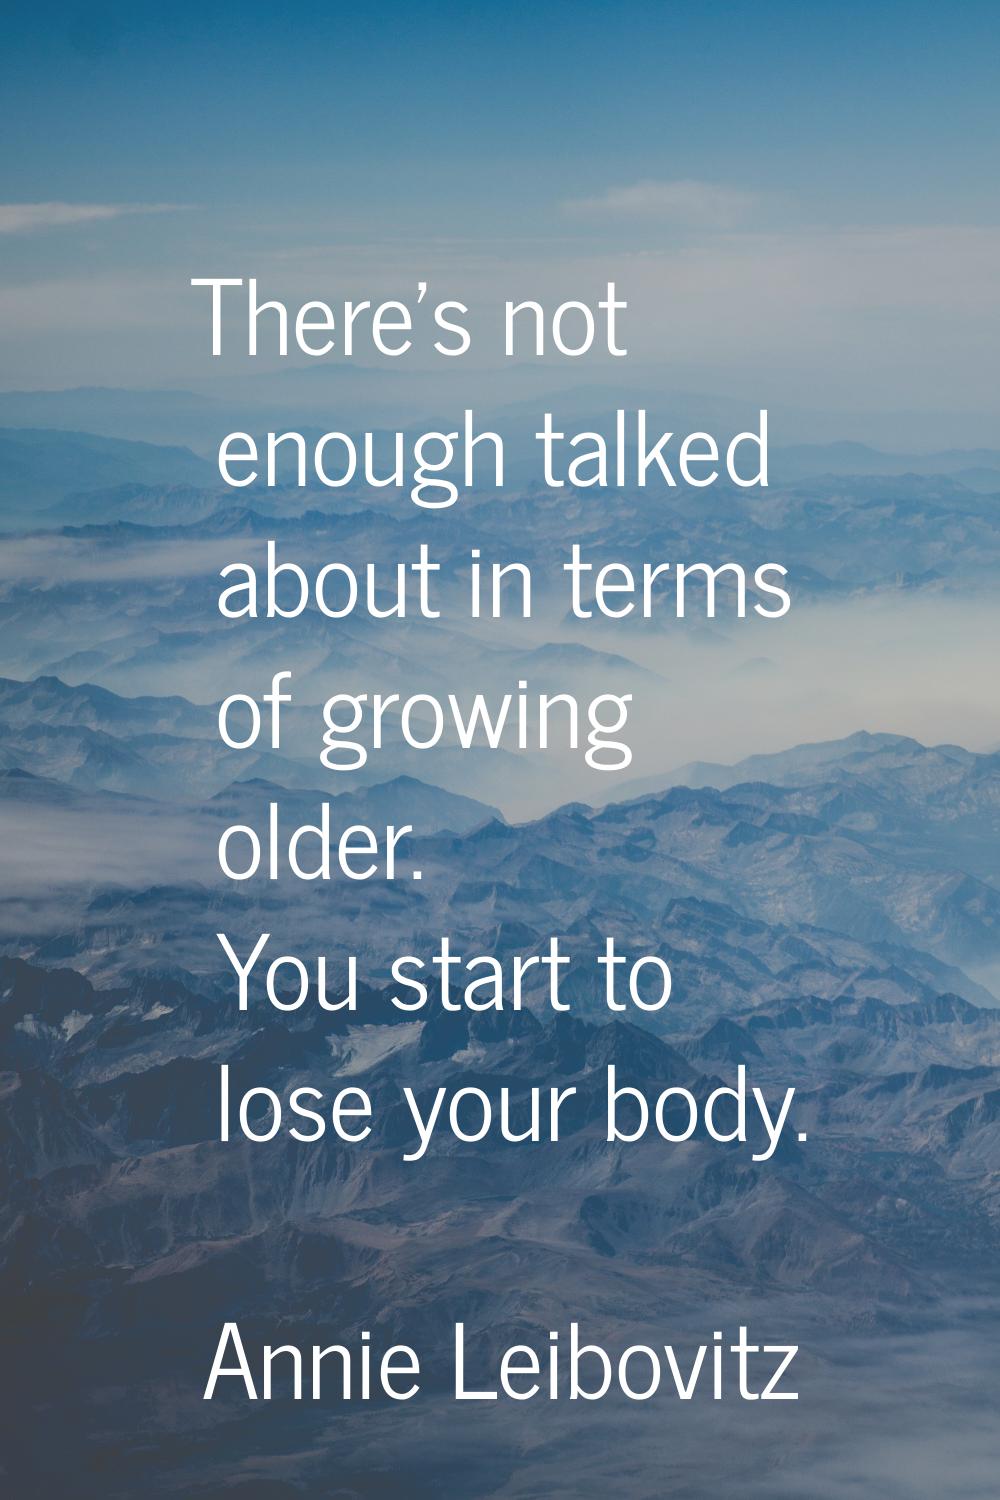 There's not enough talked about in terms of growing older. You start to lose your body.